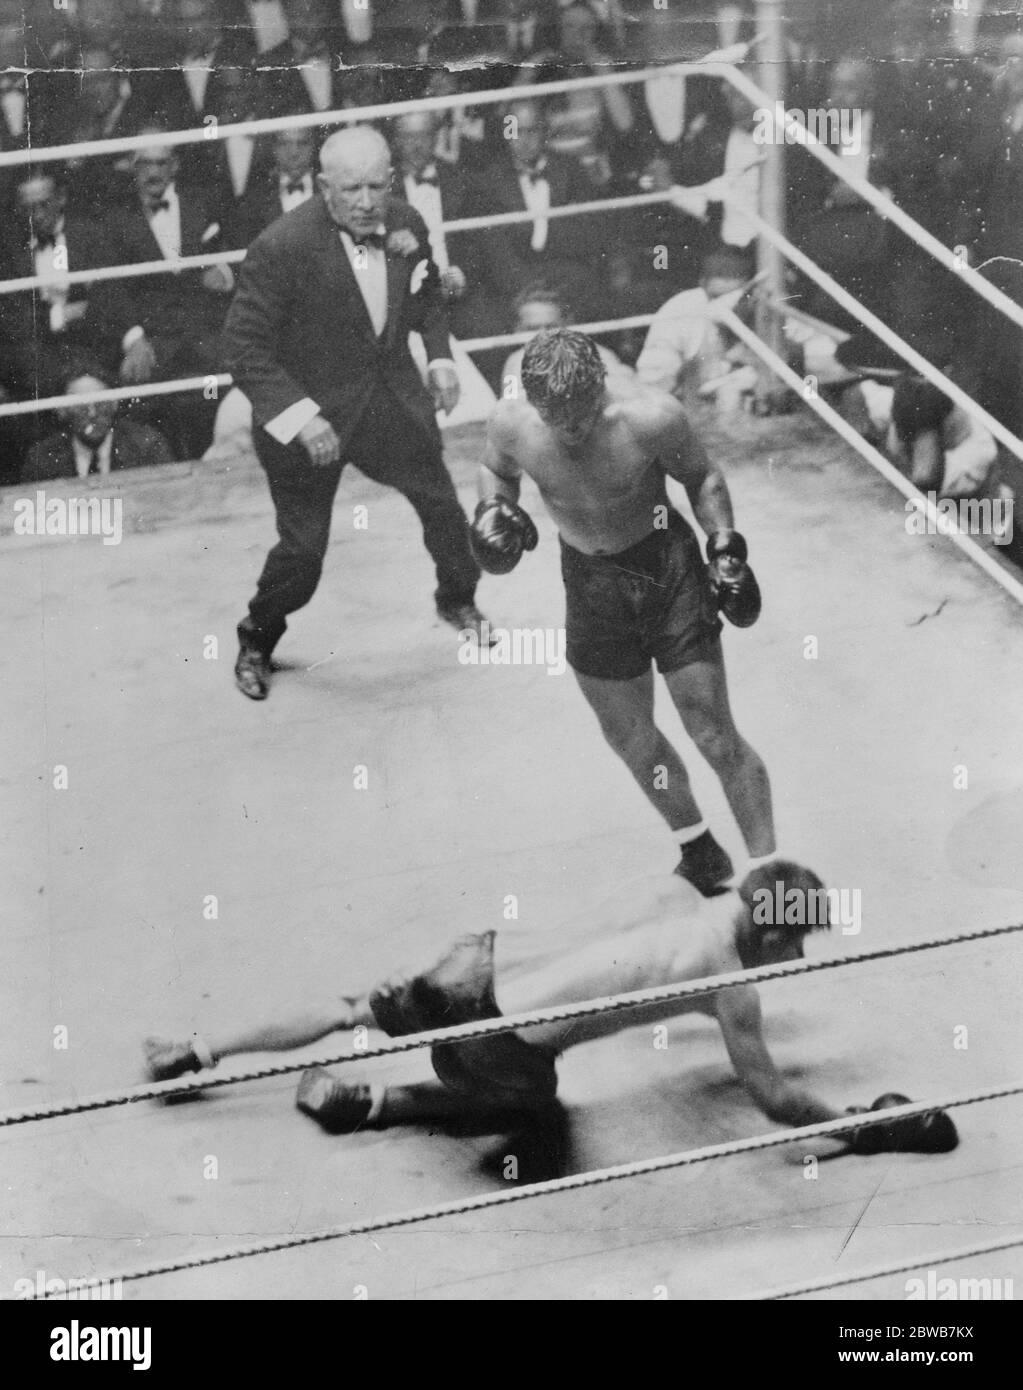 Harry Greb loses world 's title to a church deacon . Tiger Flowers won the world 's middleweight boxing championship , defeating Harry Greb , the holder , on points in a 15 round bout at New York . Tiger Flowers . 27 February 1926 Stock Photo